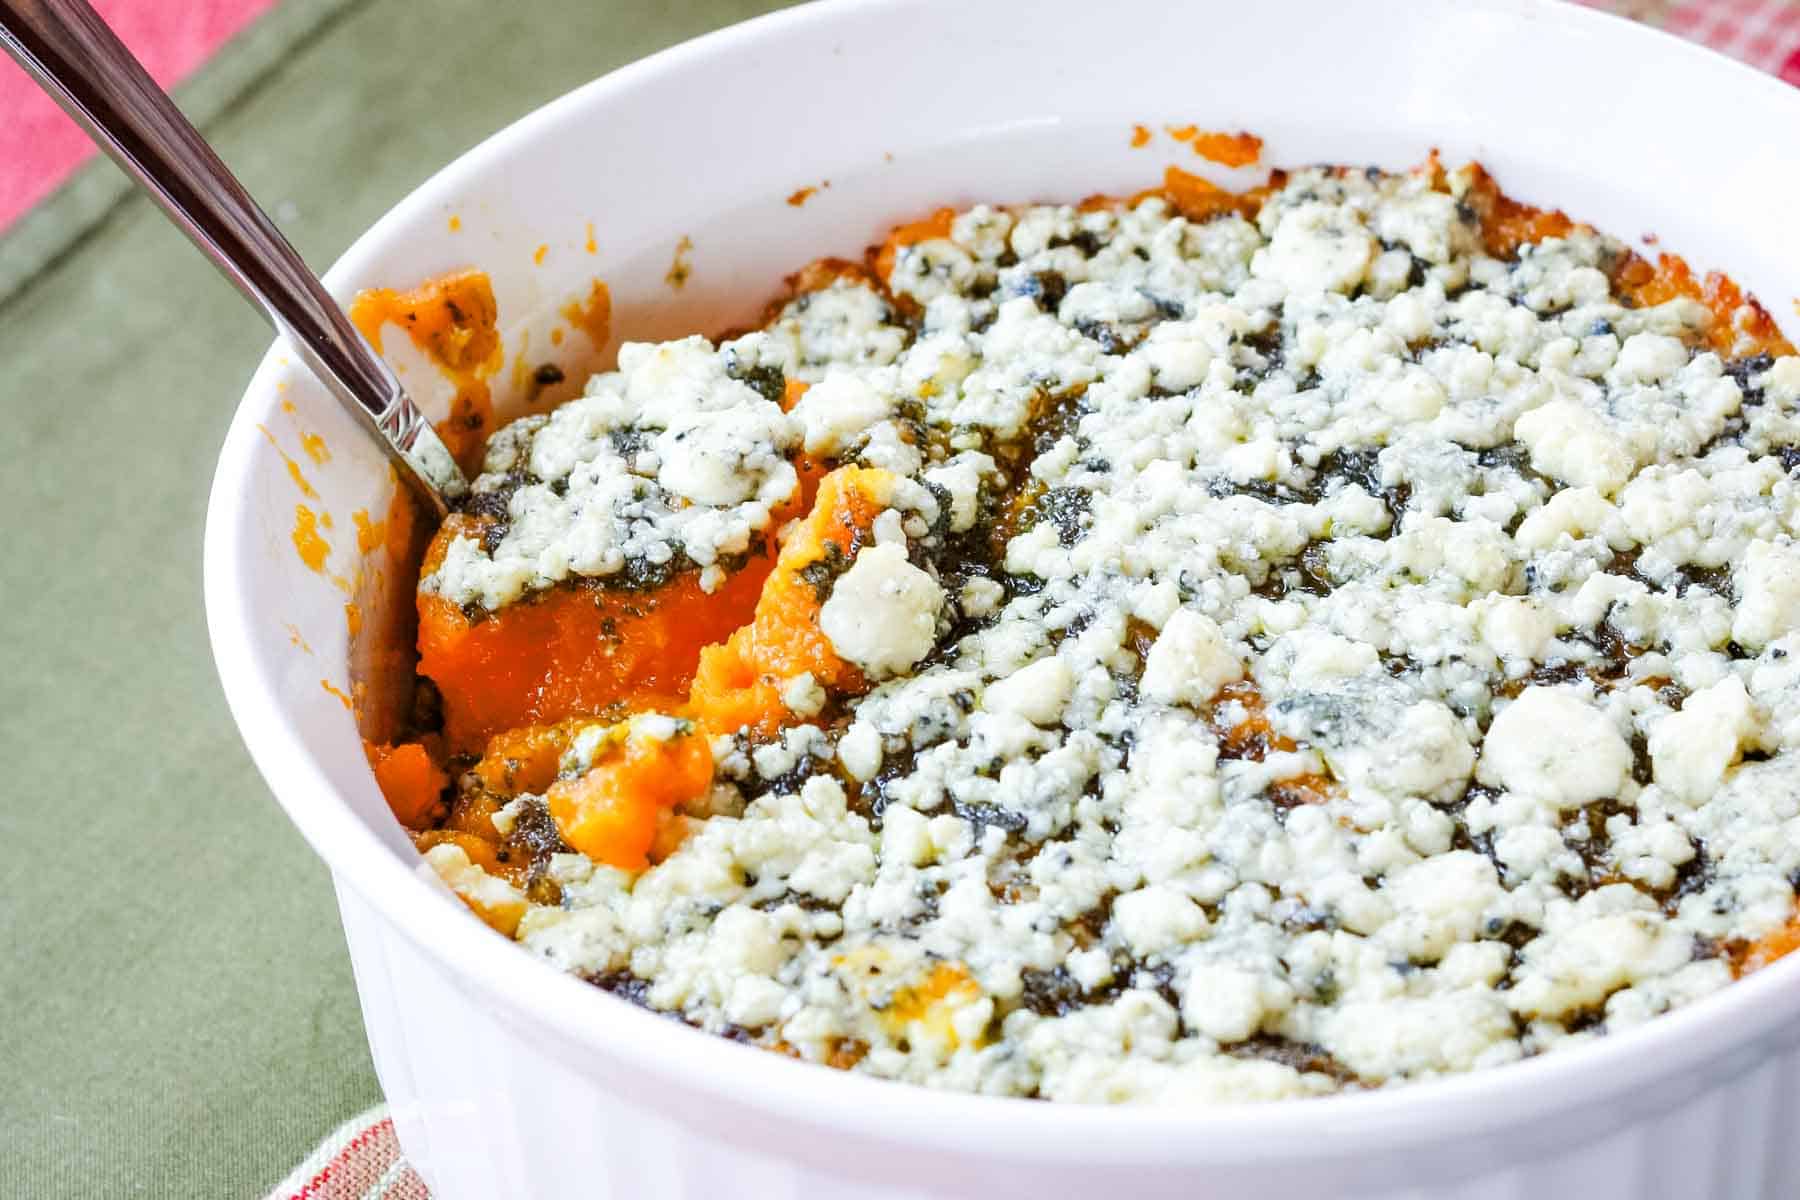 A spoon in a casserole dish of Butternut Squash Gratin topped with gorgonzola cheese.